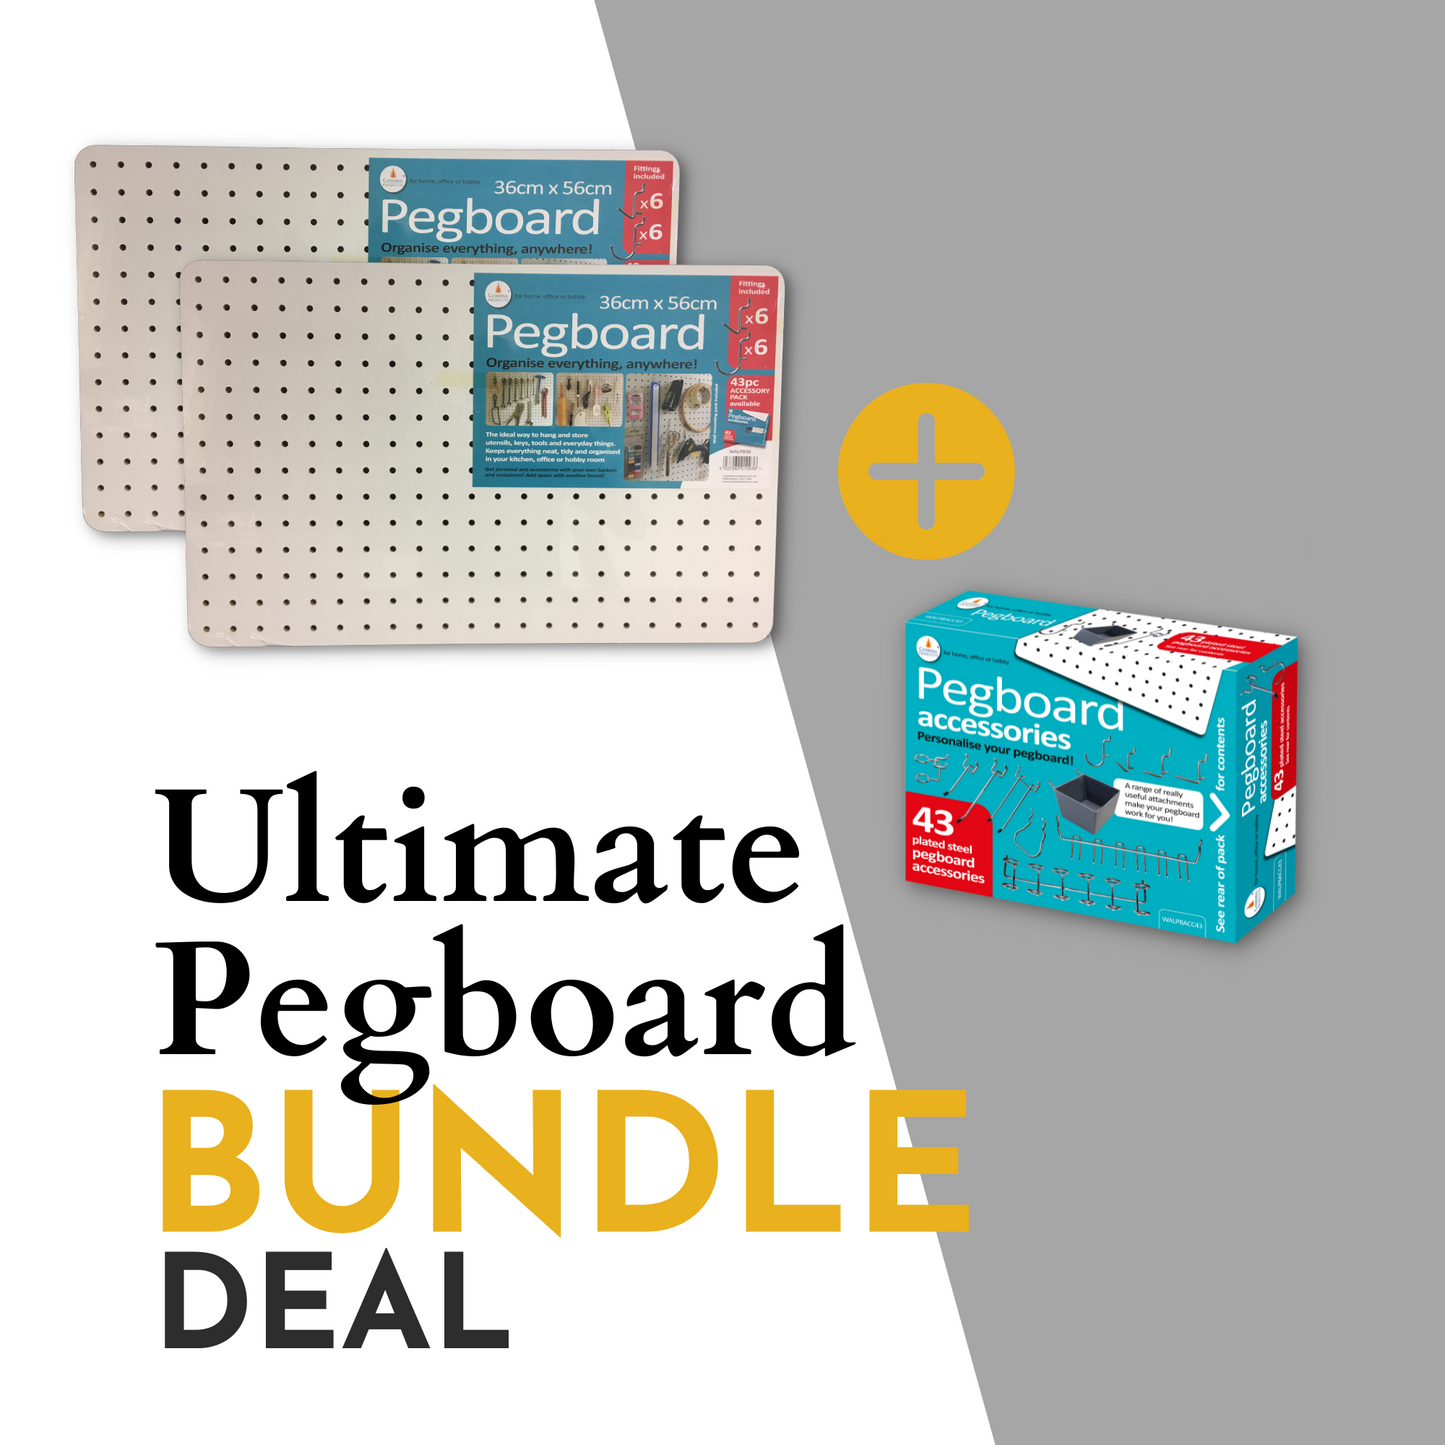 25% Off! - 2 Pegboards PLUS Accessory Pack